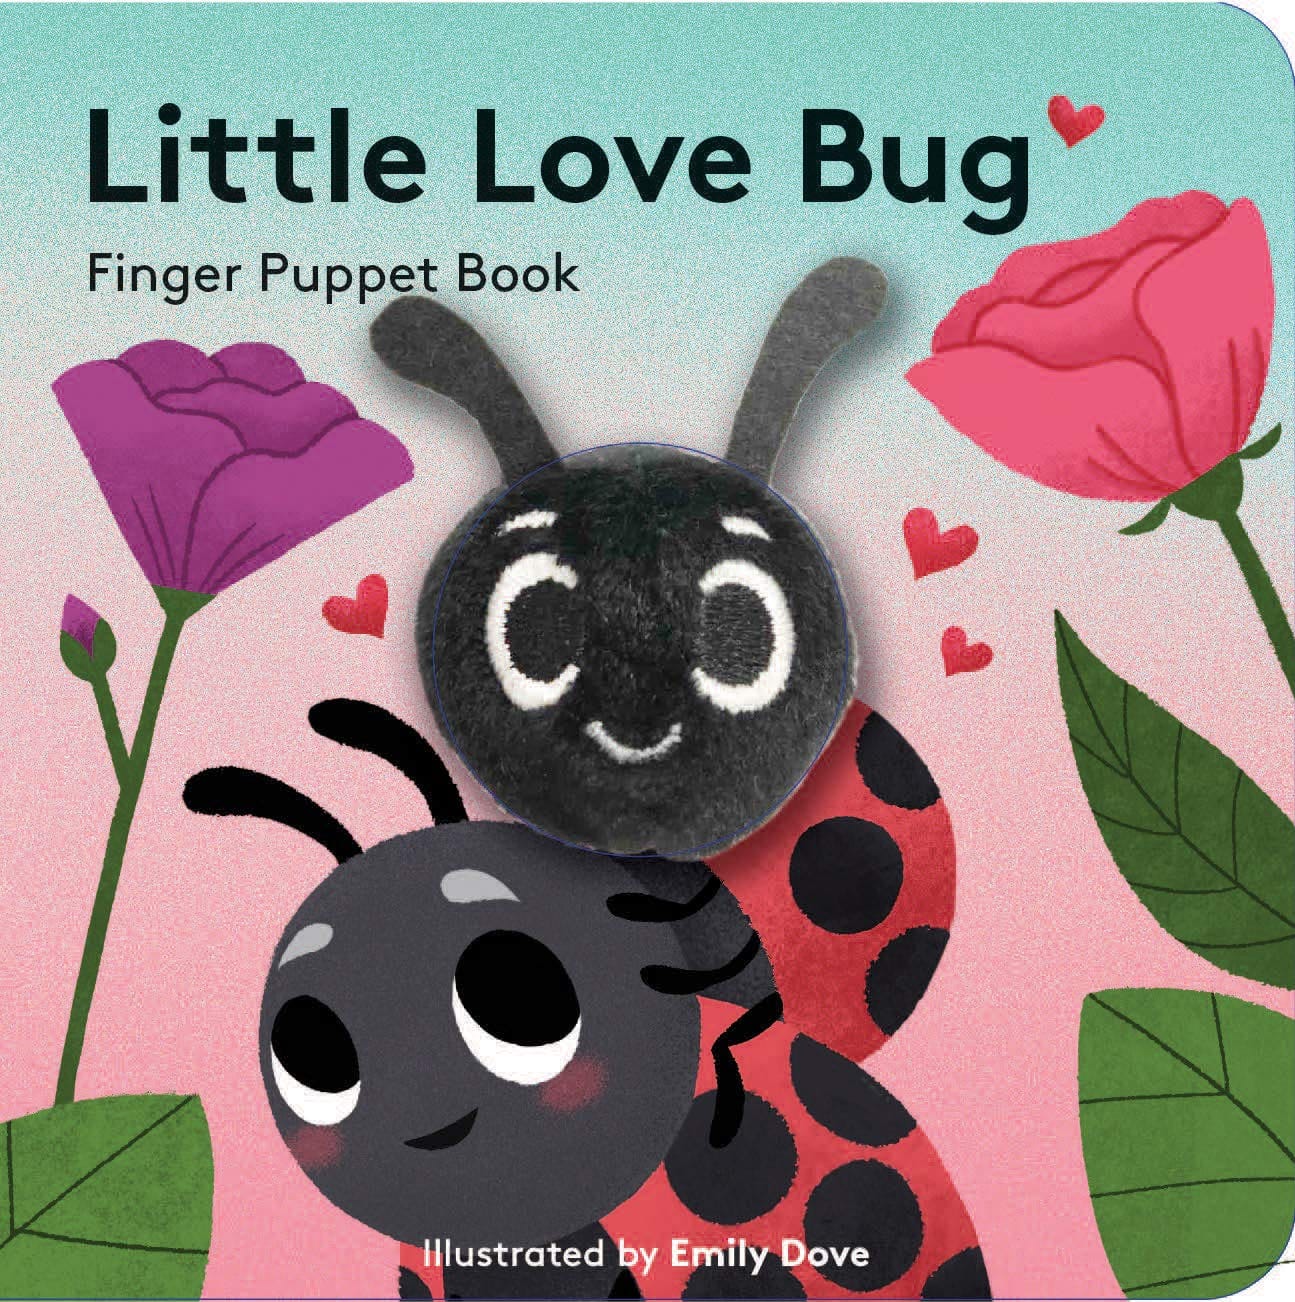 "Little Love Bug" by Chronicle Books